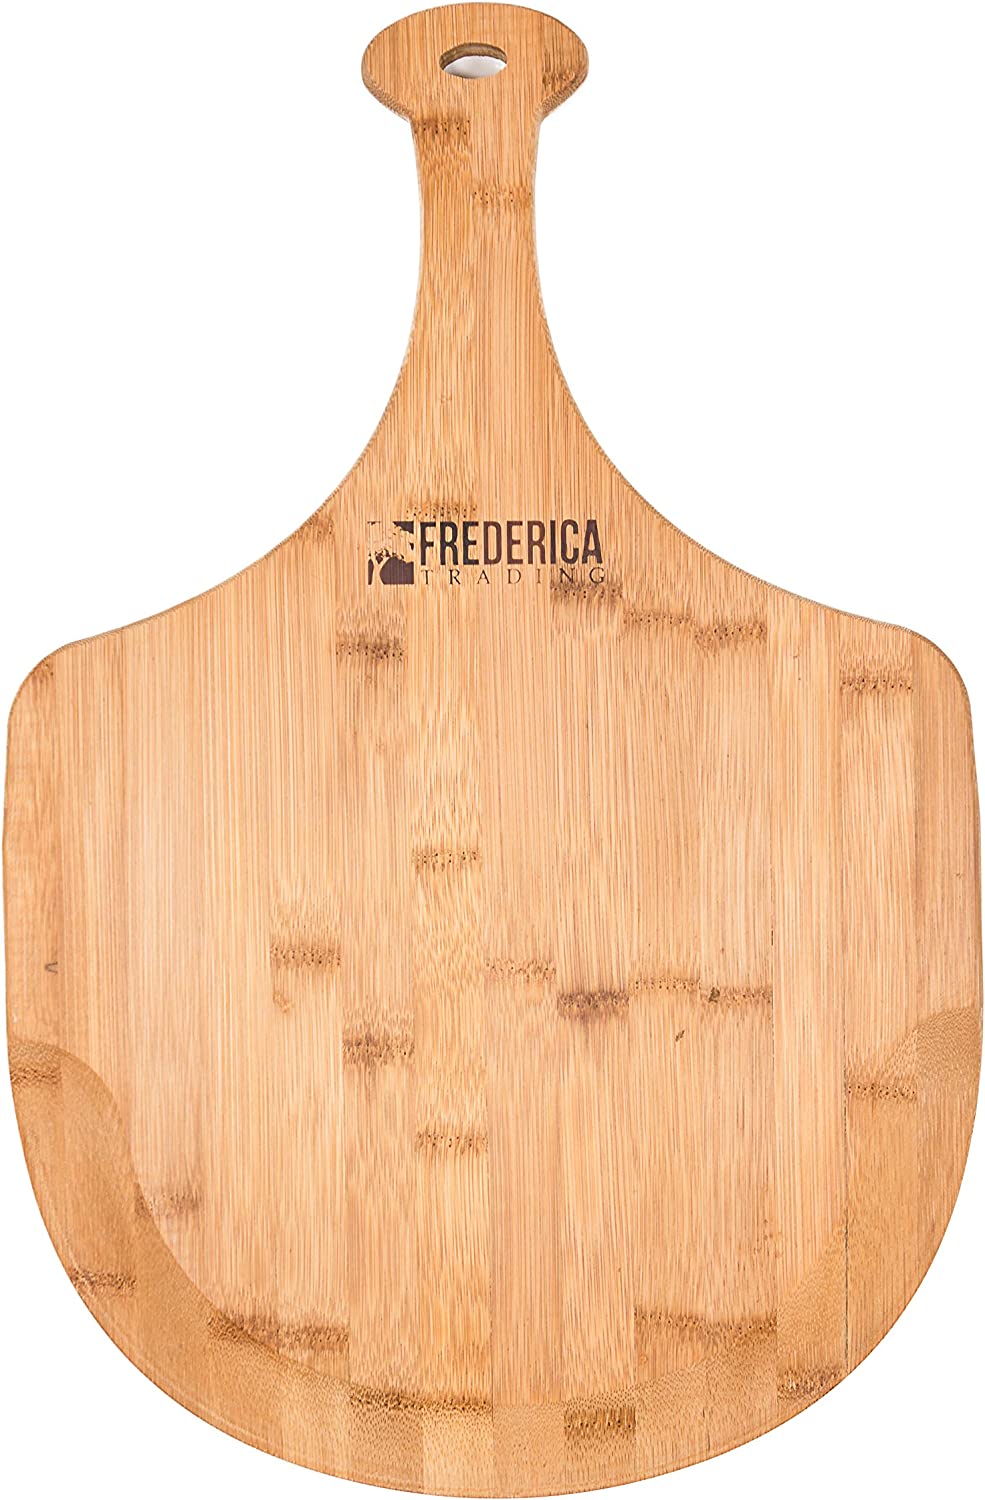 Frederica Trading Eco-Friendly Certified Organic Pizza Peel